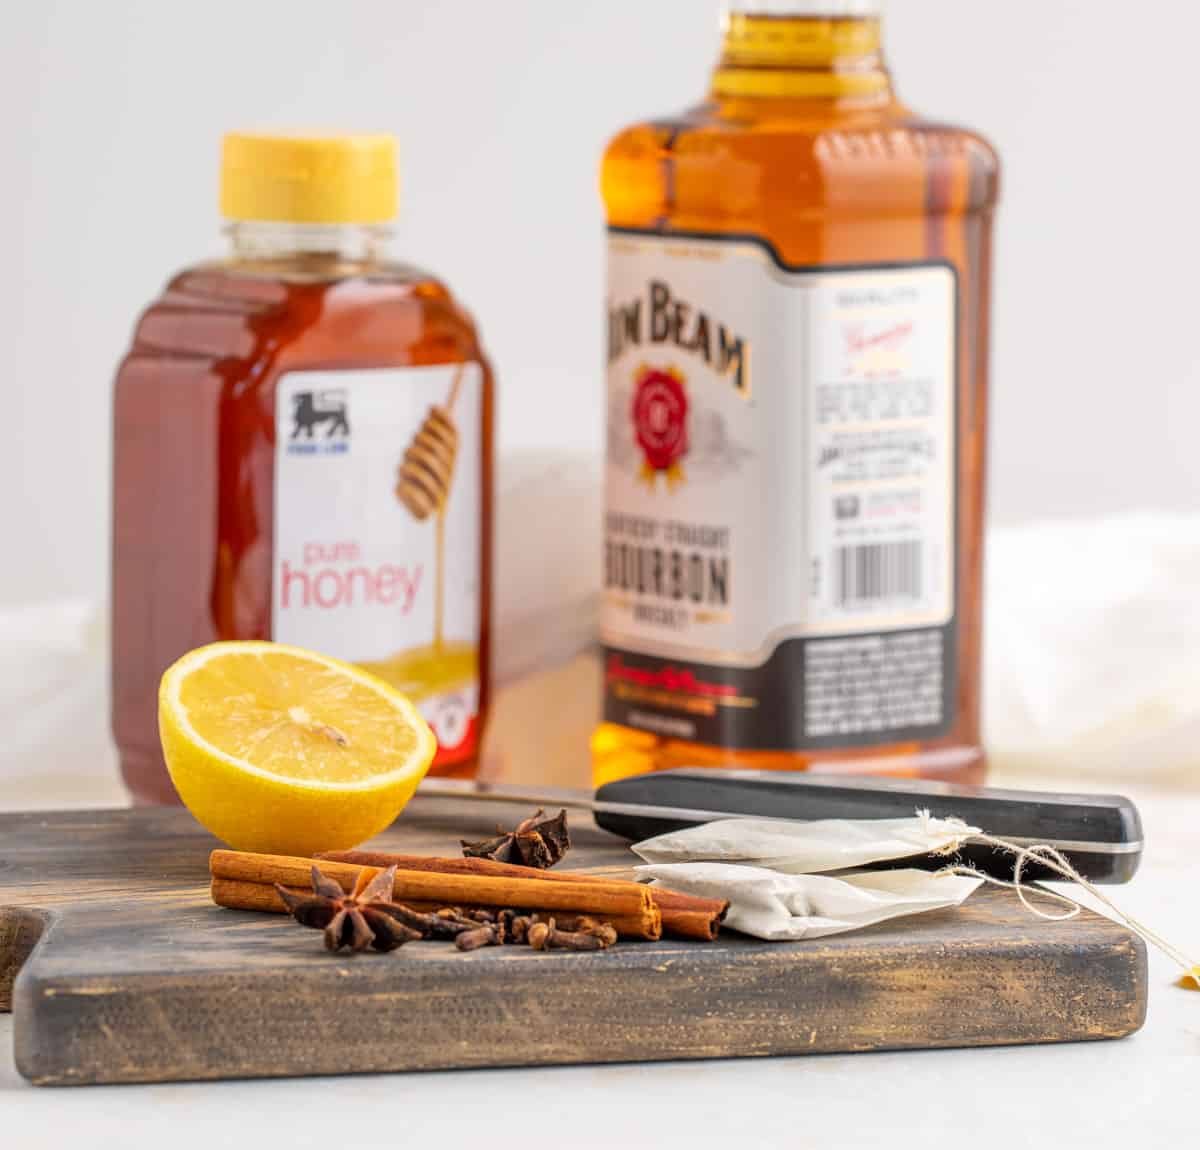 Front view of ingredients for making a hot toddy: Whiskey, honey, tea bags, a lemon, cinnamon sticks, and star anise.